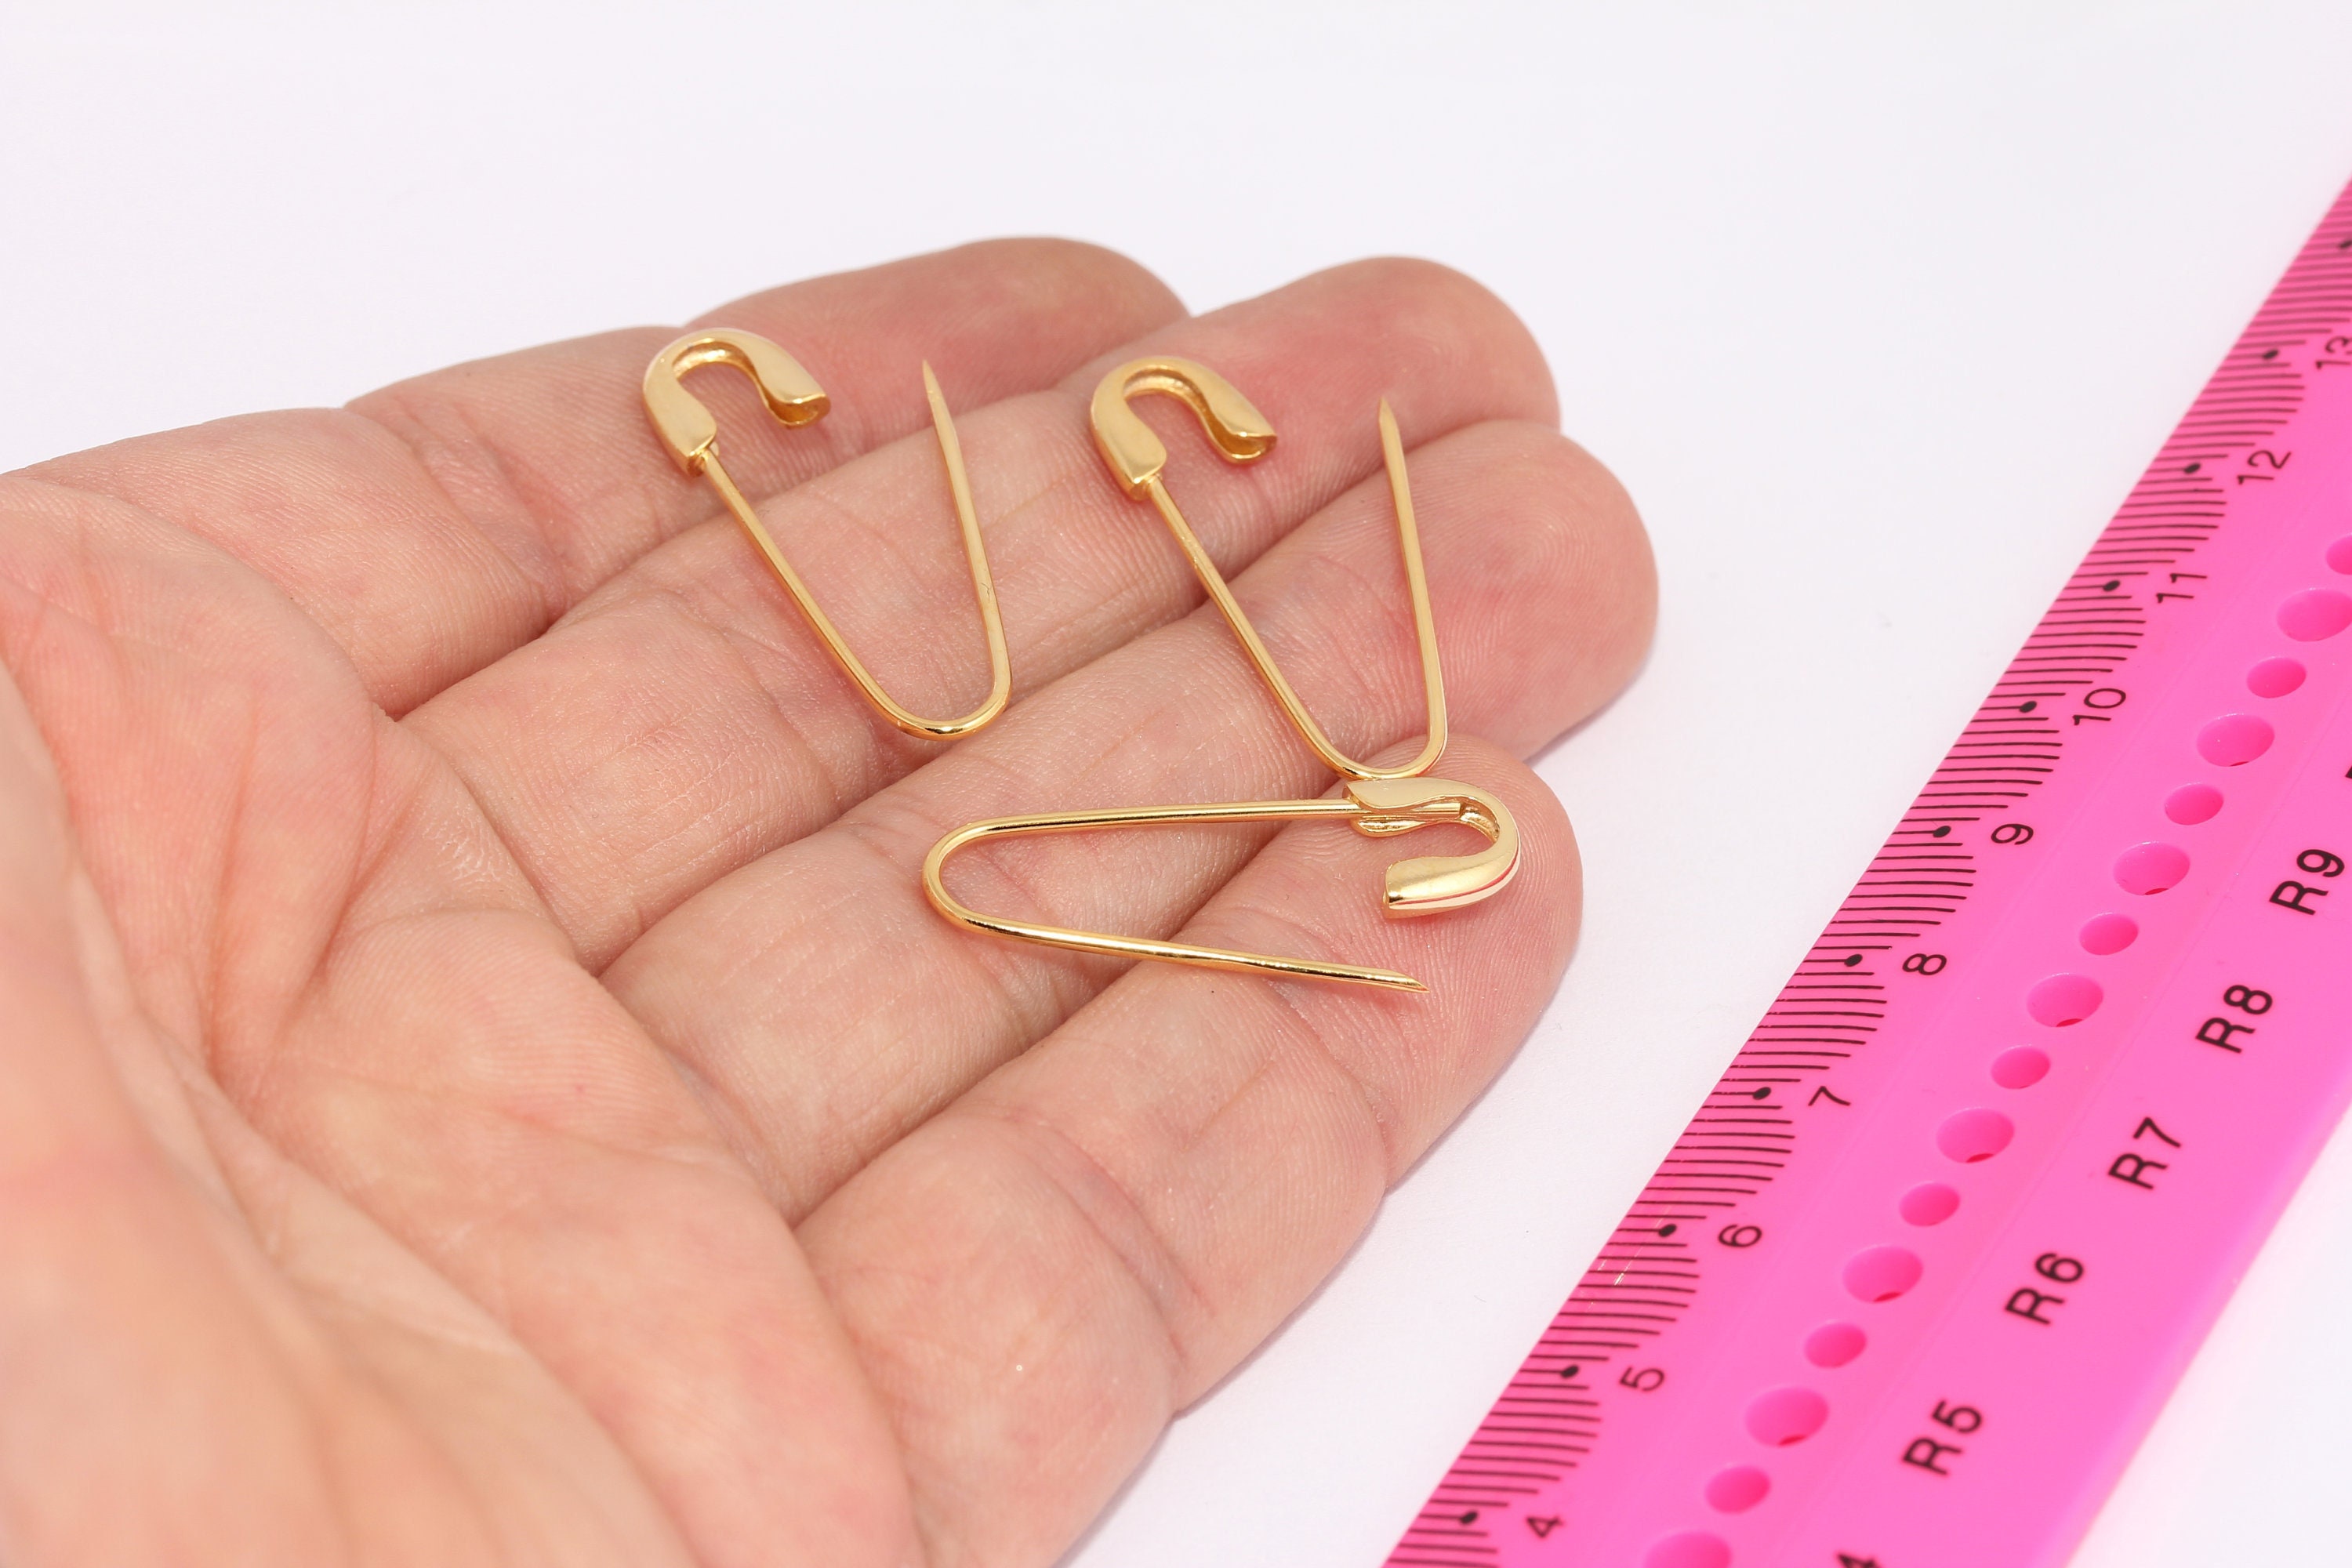 24pcs Small Safety Pins Rose Gold 20mm Metal Safety Pins Sewing